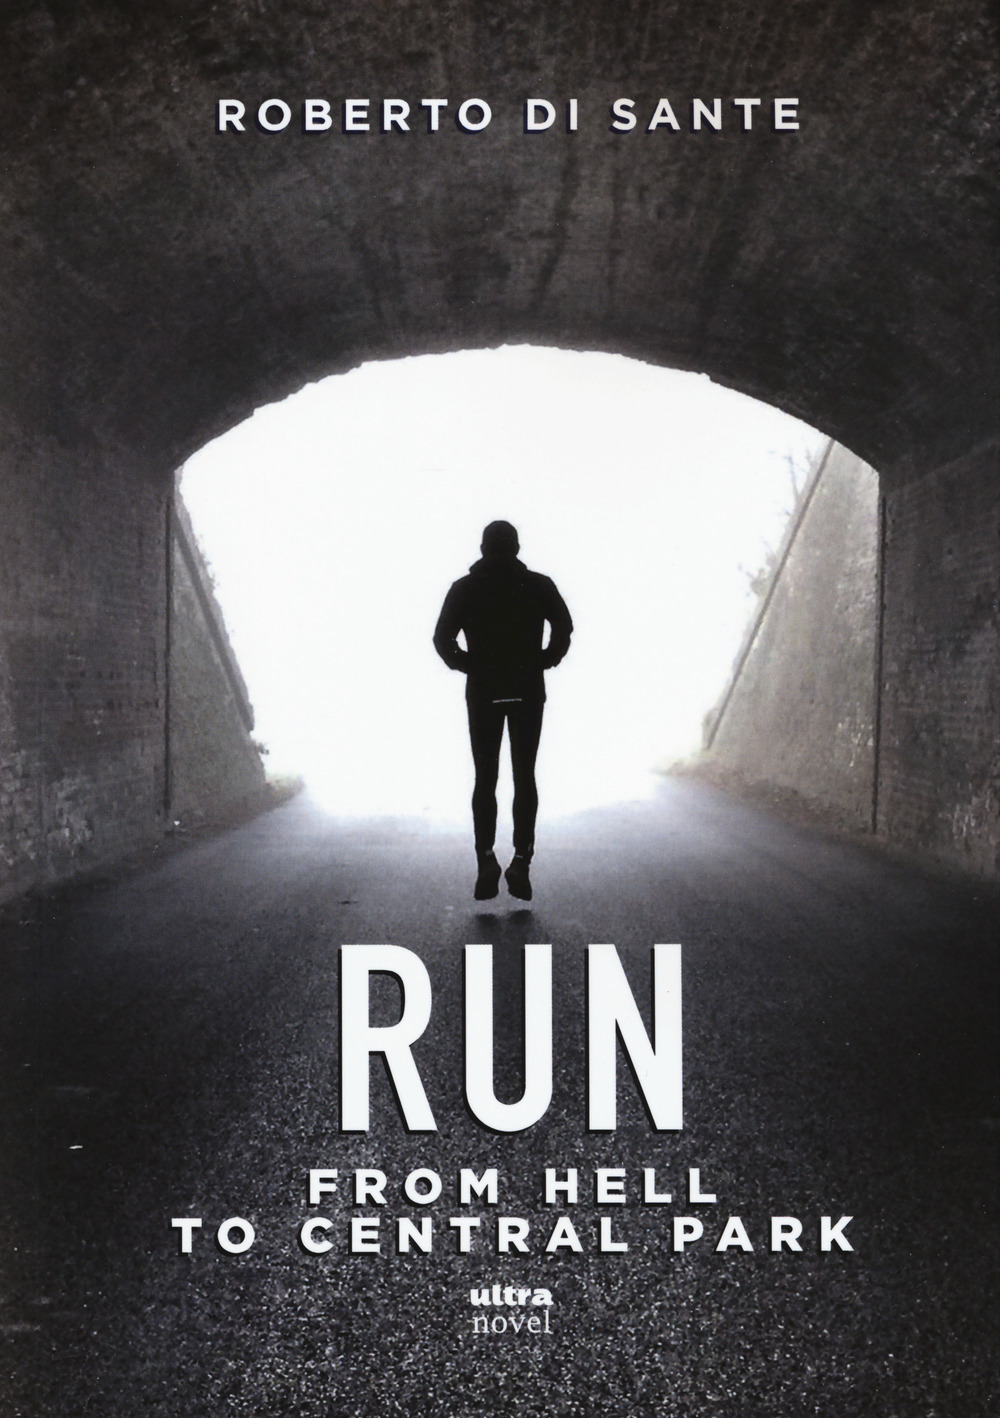 Run. From hell to Central Park